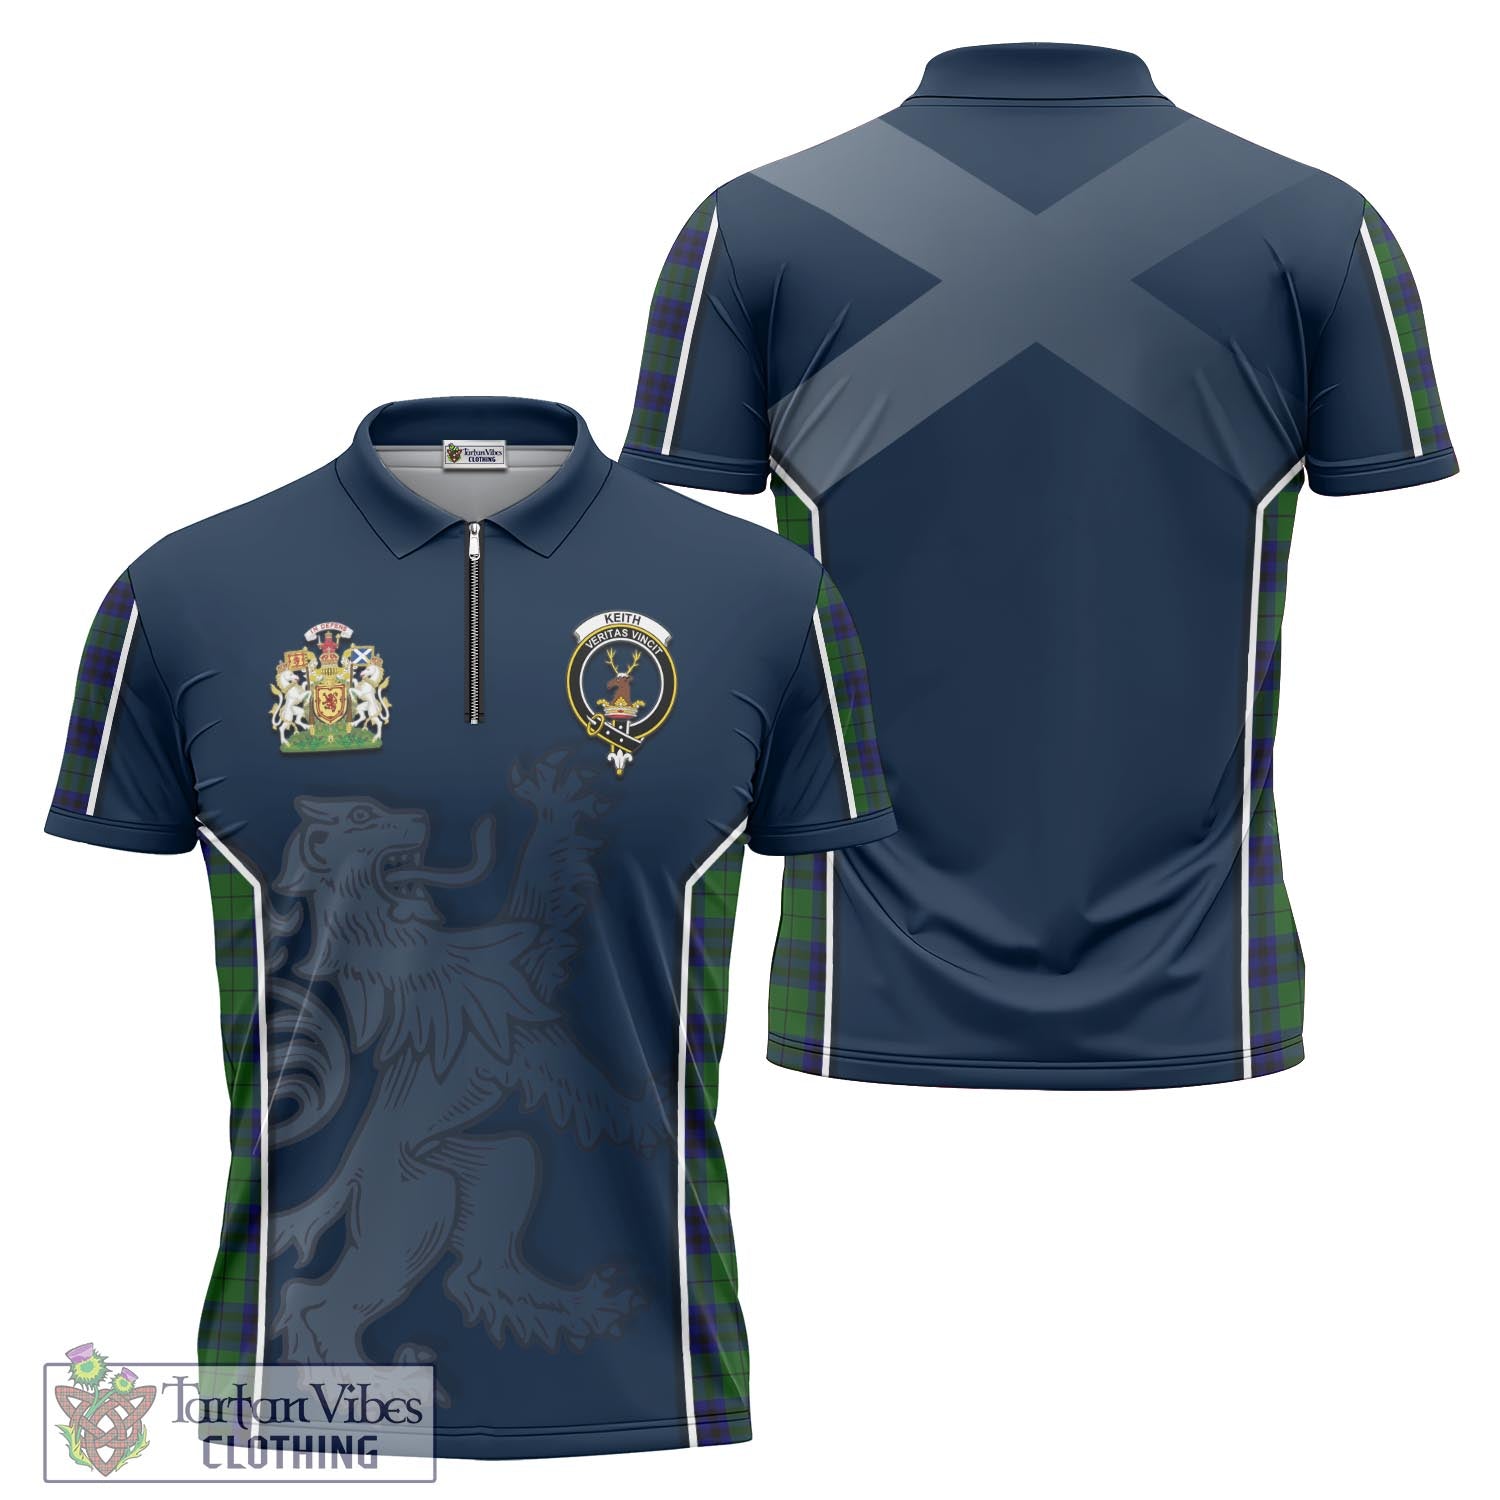 Tartan Vibes Clothing Keith Modern Tartan Zipper Polo Shirt with Family Crest and Lion Rampant Vibes Sport Style